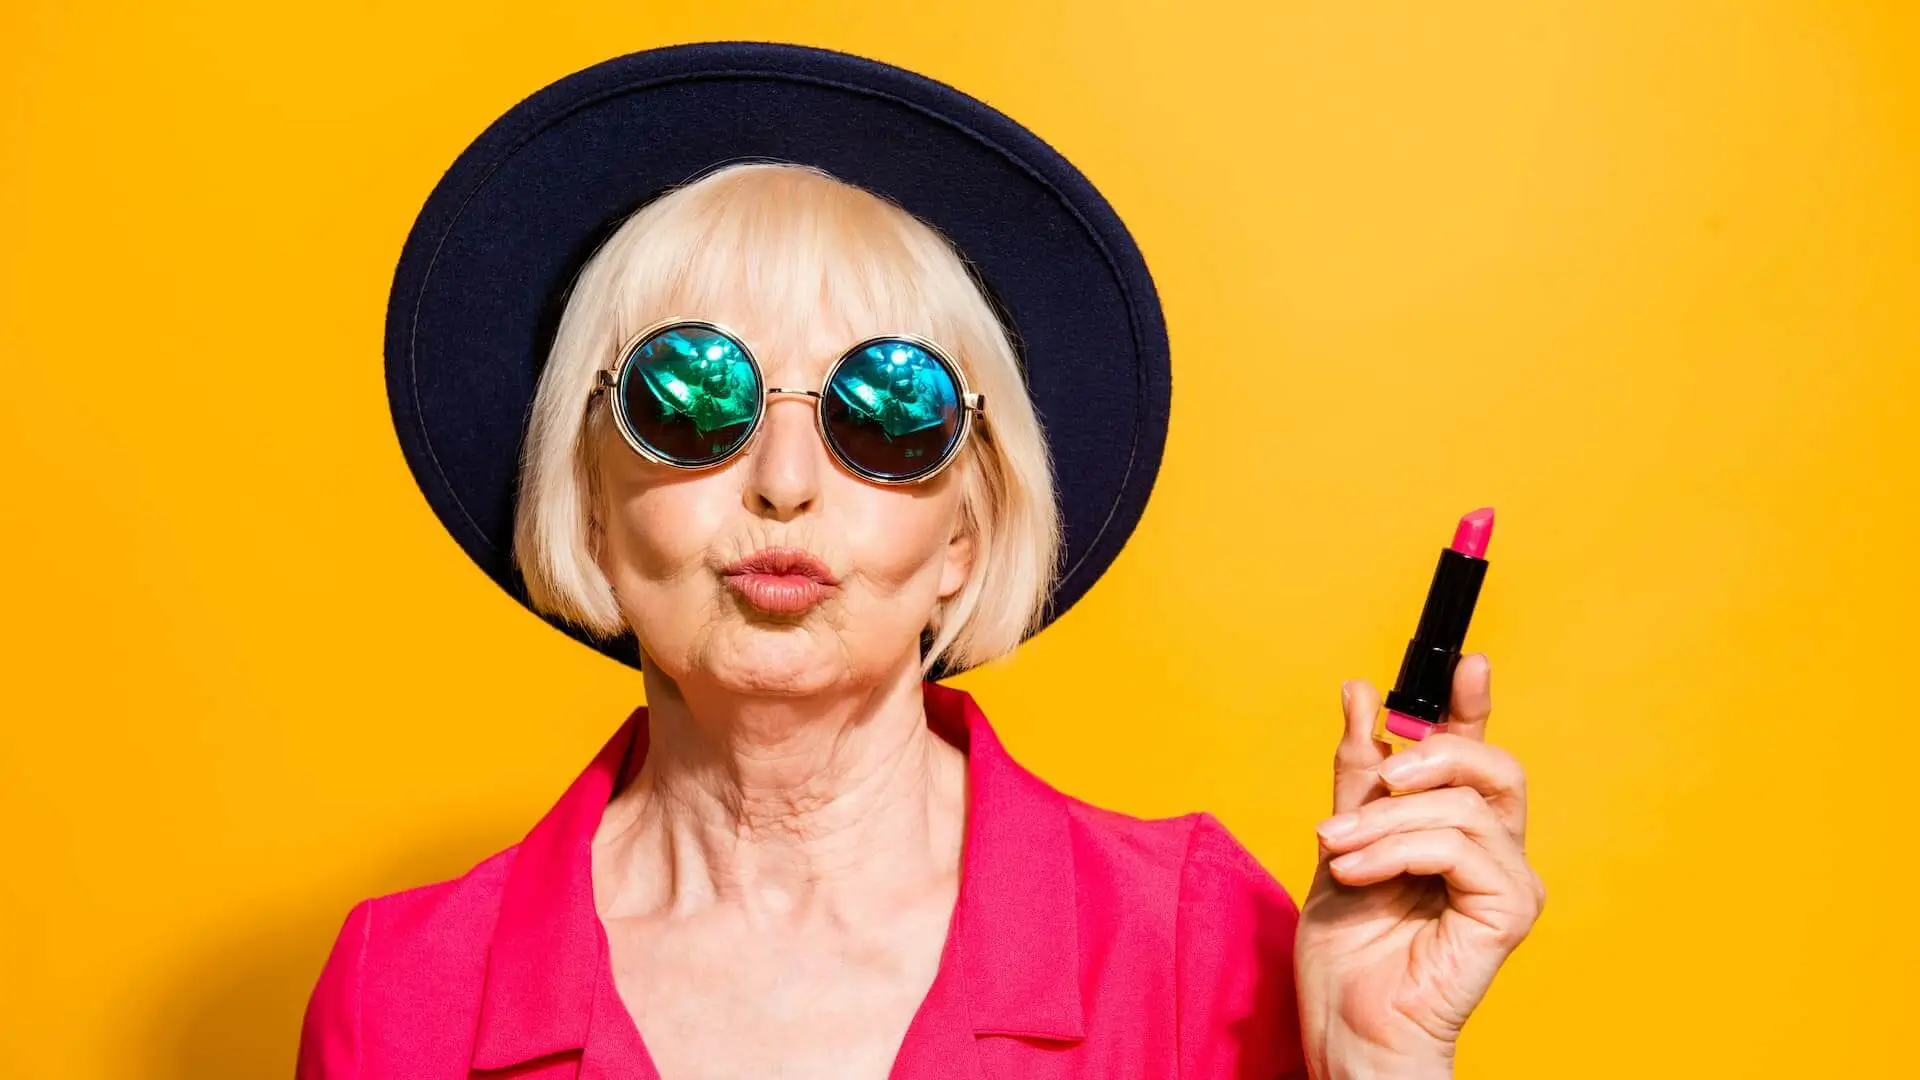 Grandmother getting ready for date! Charming, attractive old woman holding red lipstick pouting lips for a kiss isolated on bright yellow background.